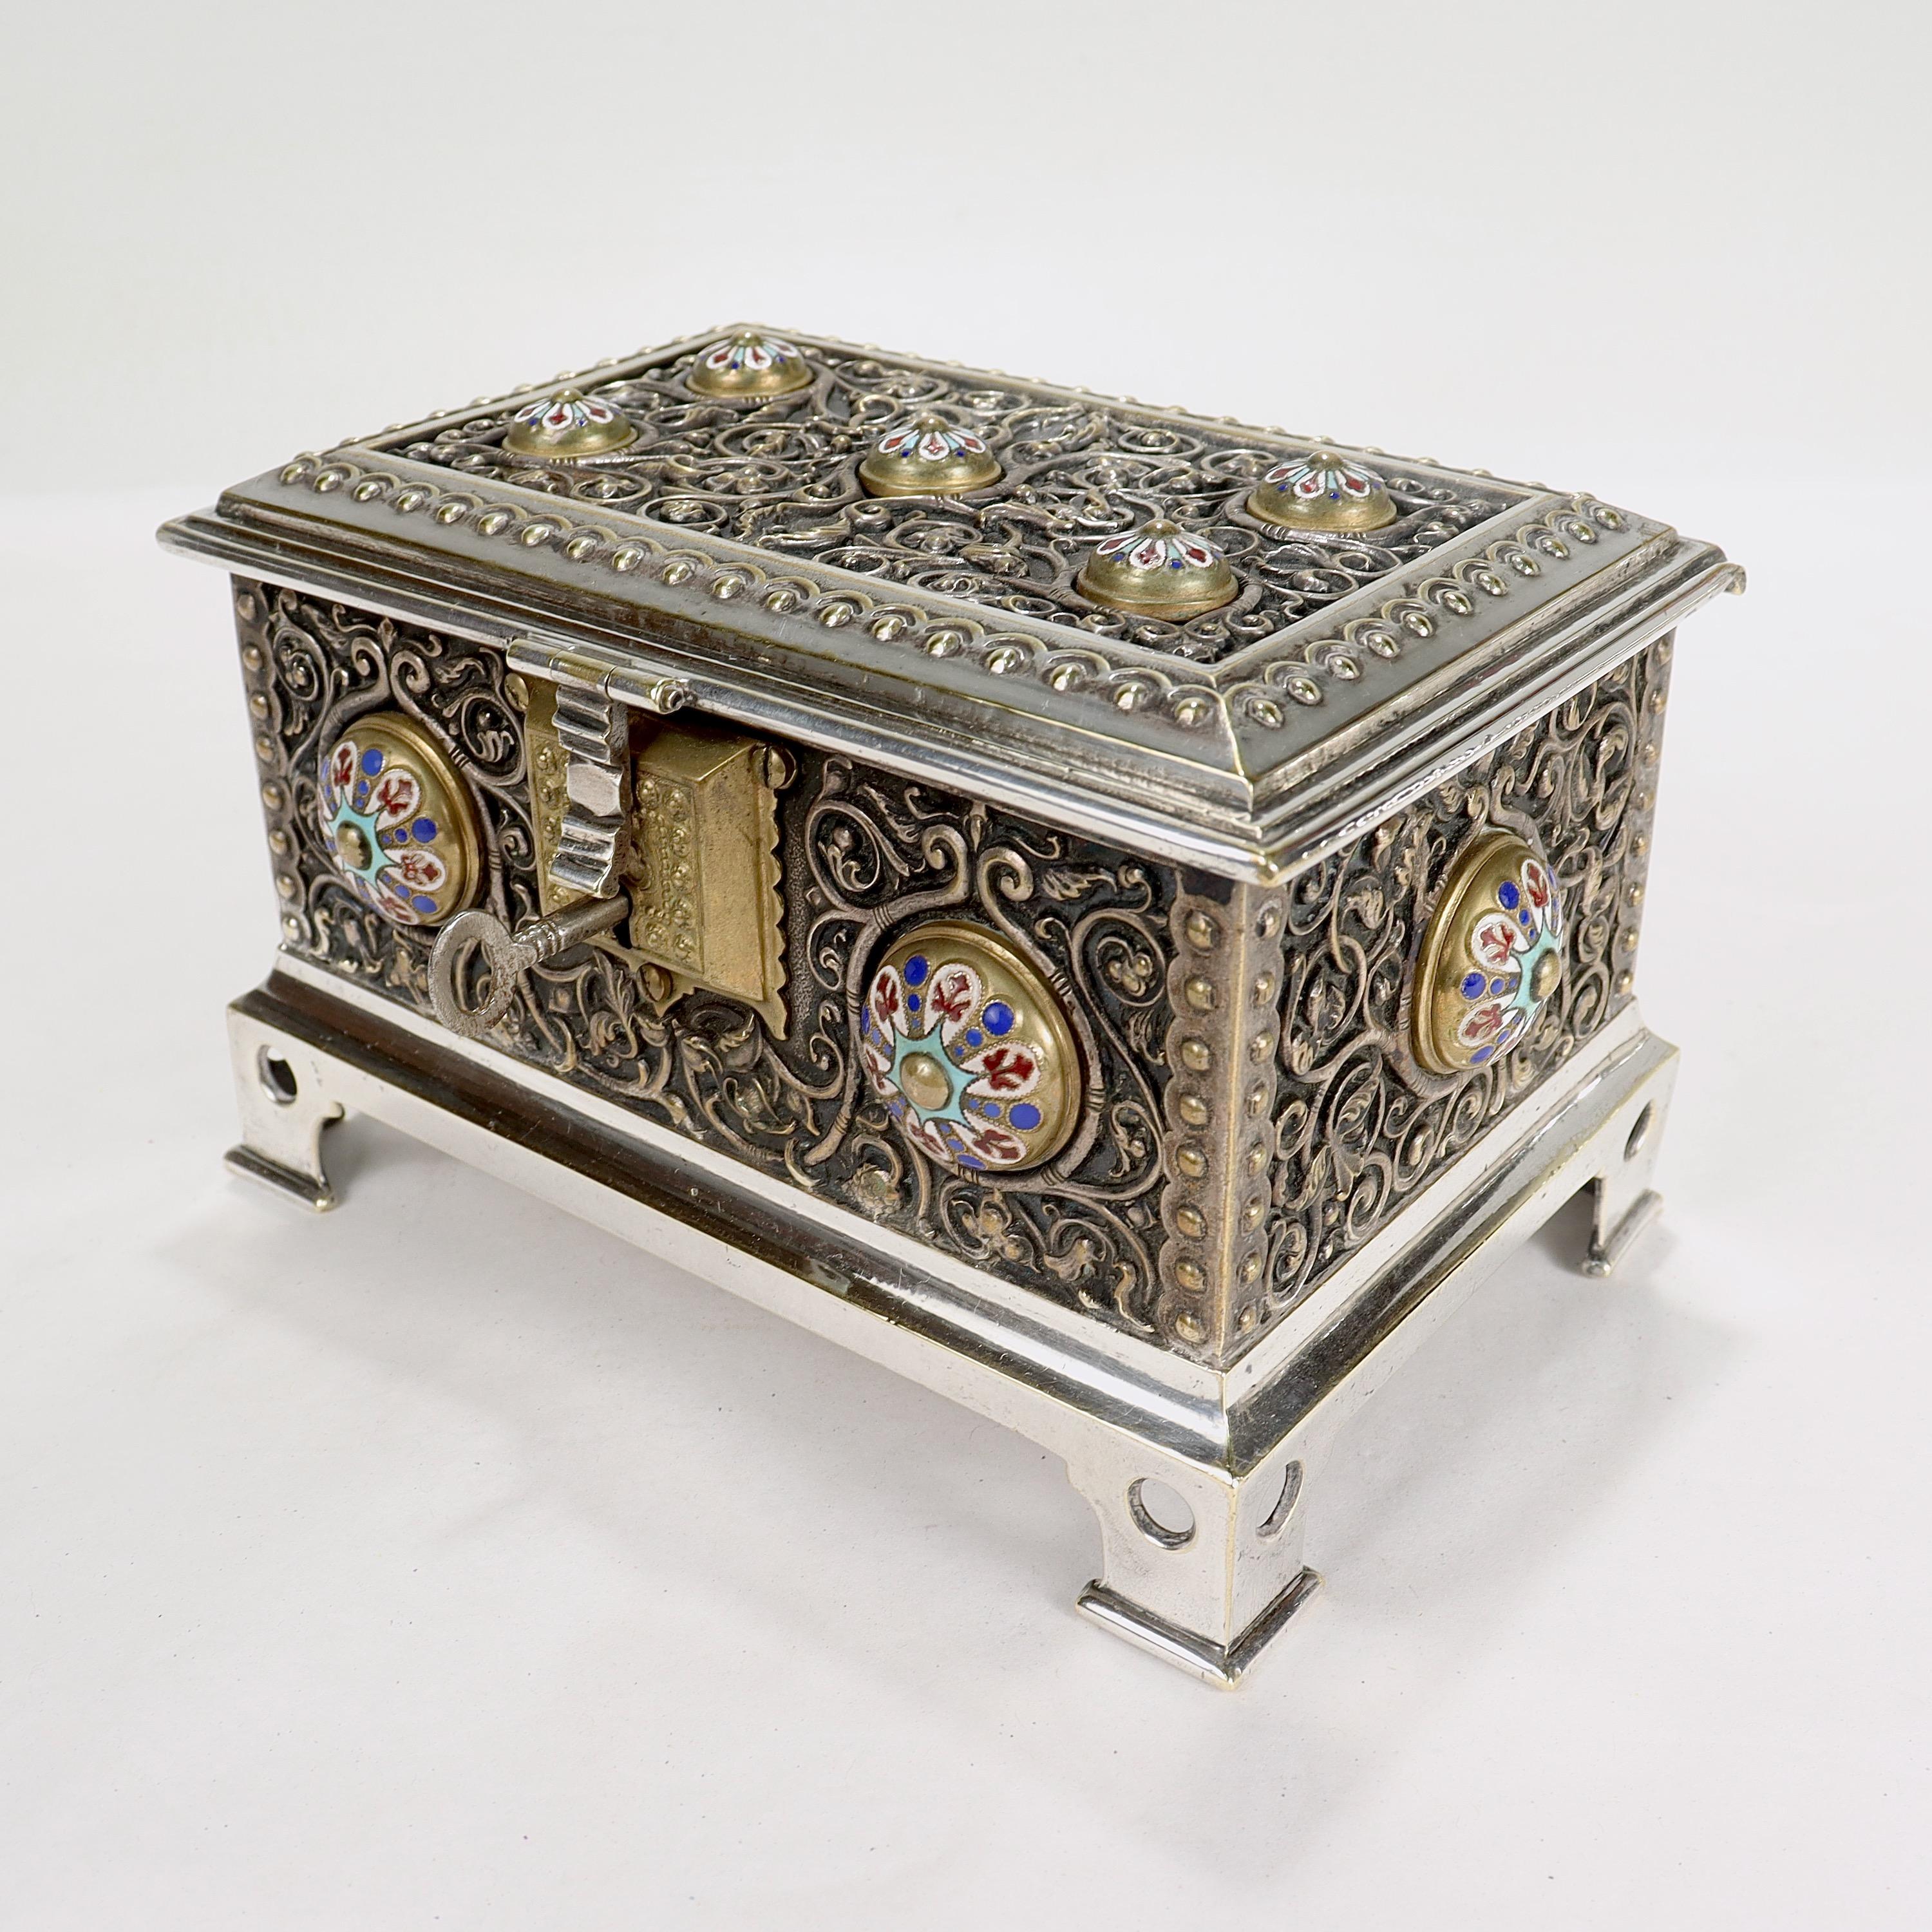 A fine silver & enamel table box or casket.

With stylized floral & vine work throughout, raised circular enameled cabochons on all sides, and raised bracket feet. 

The interior is lined with red velvet.

Marked with an M to the base and an 11 to